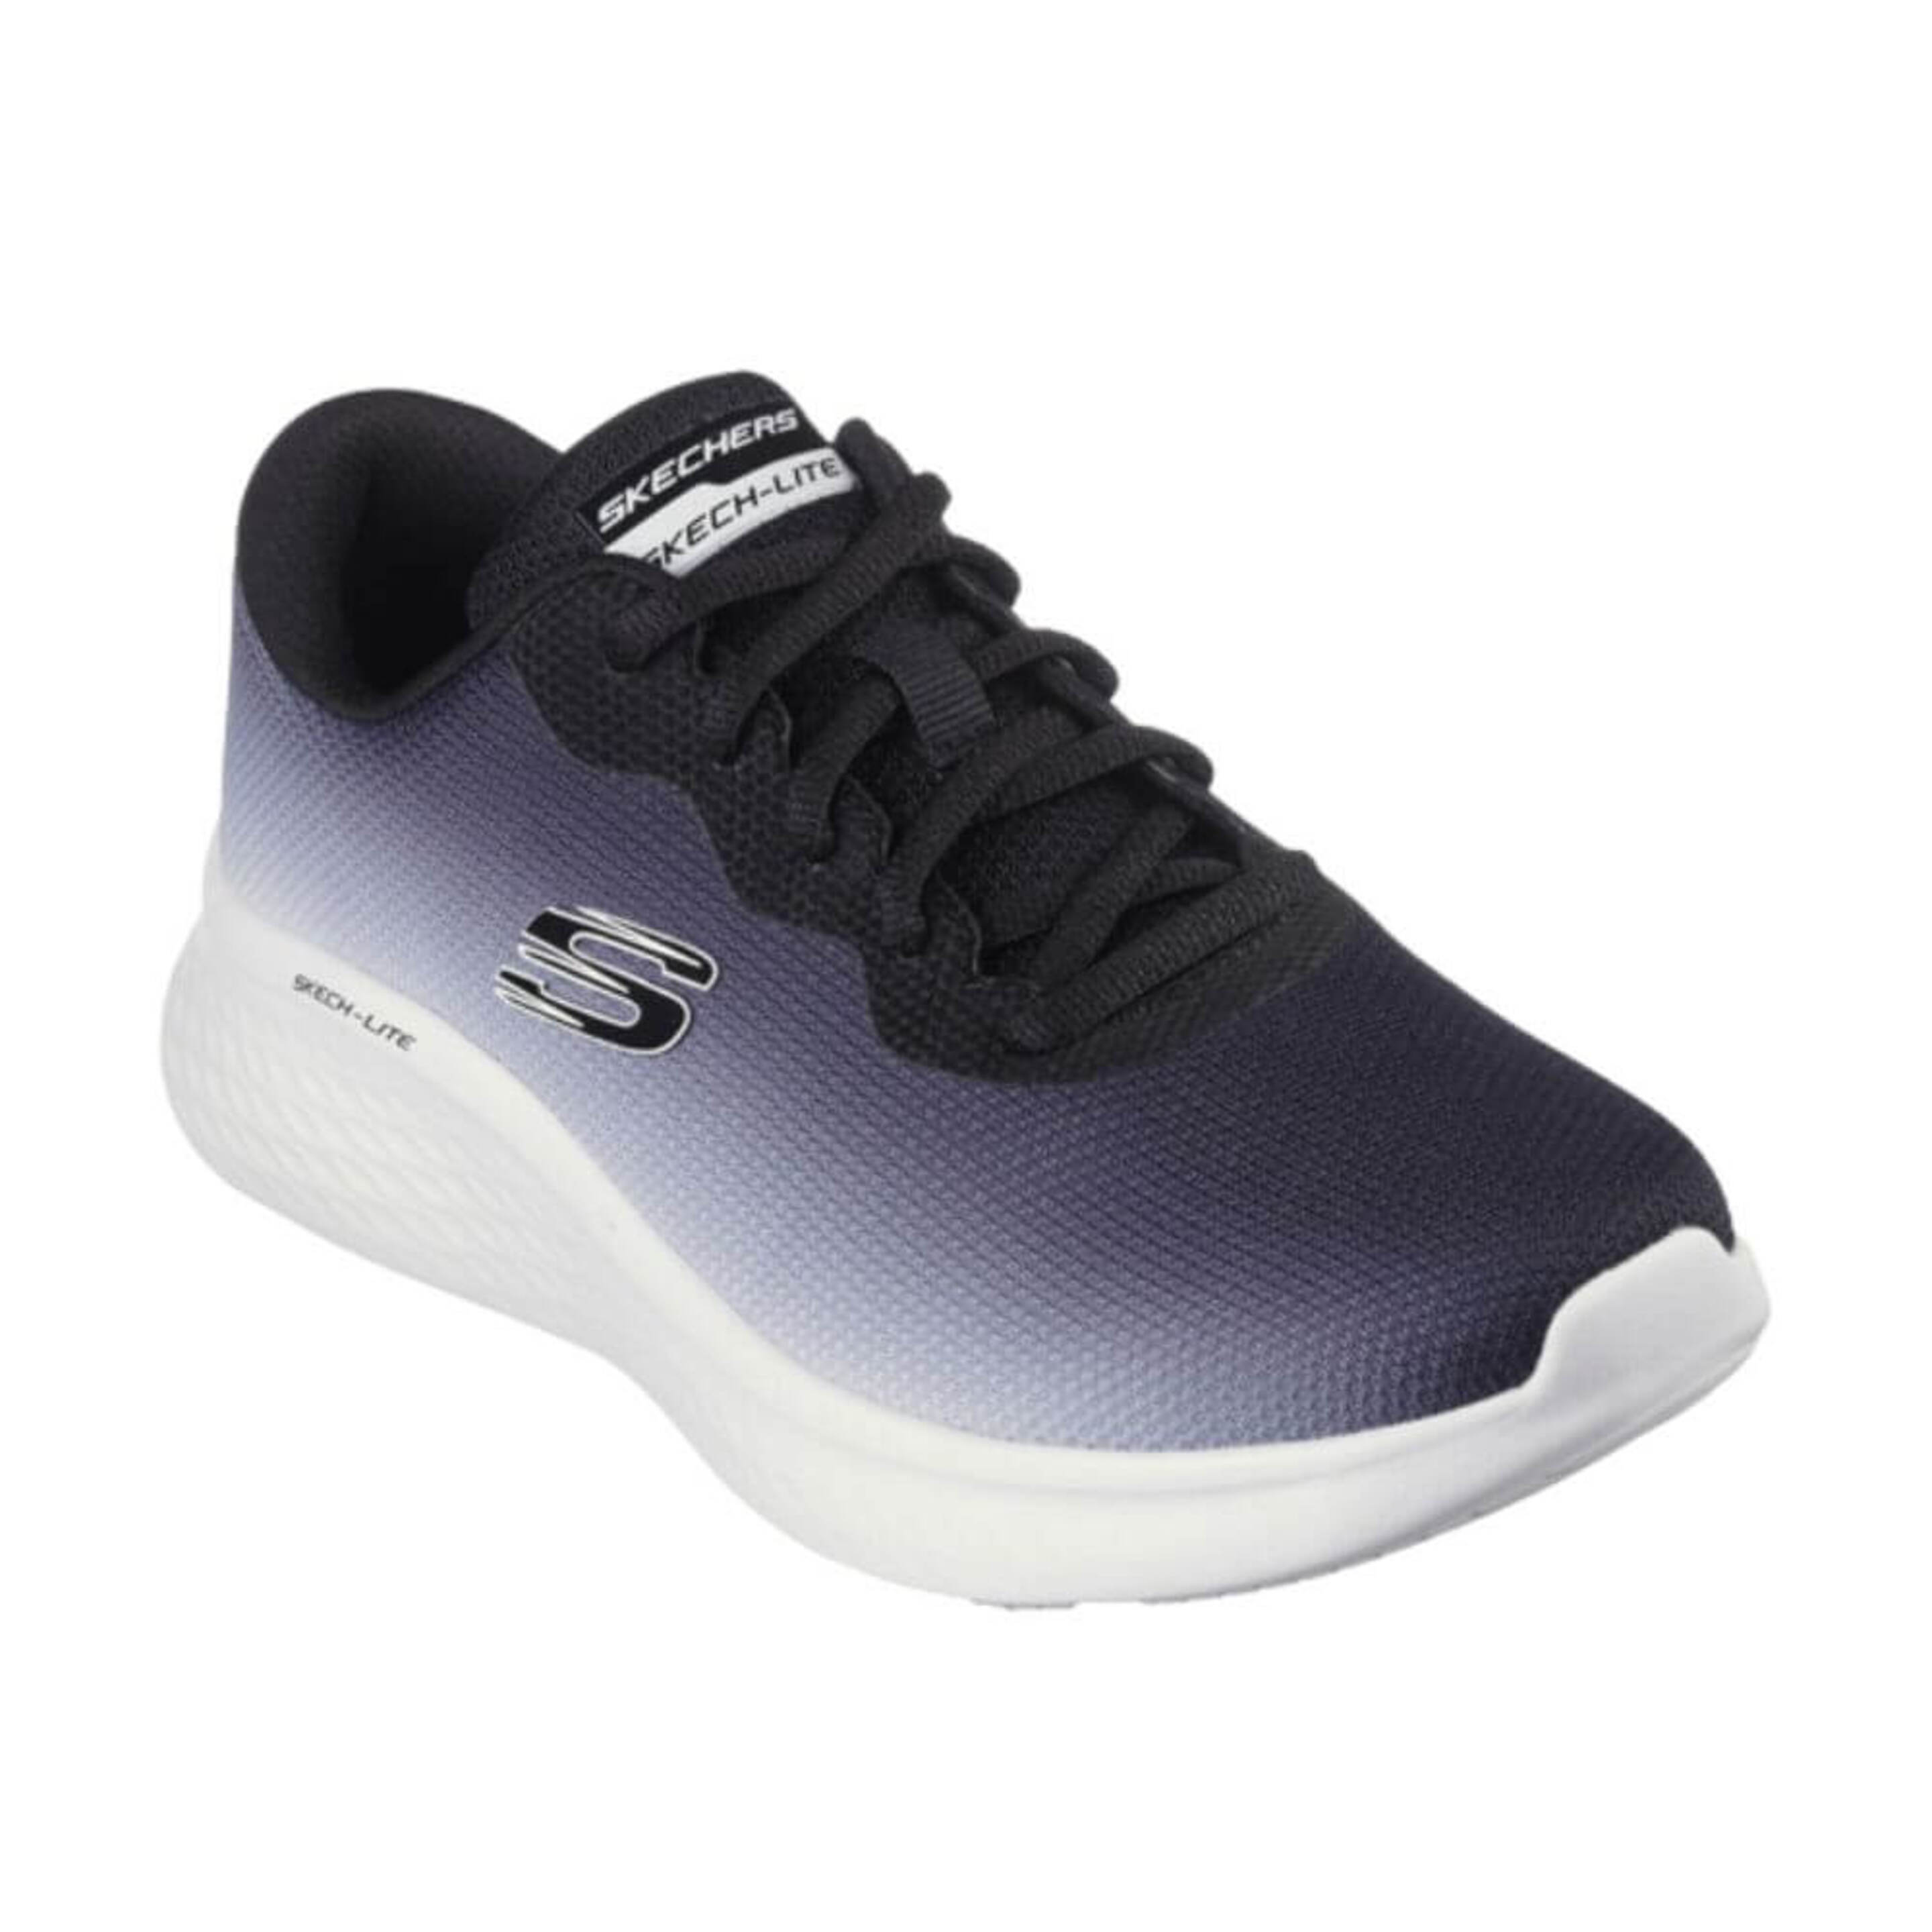 Sapatilhas Running Mulher Skechers Skech Lite Pro- Fade Out. Preto/branco